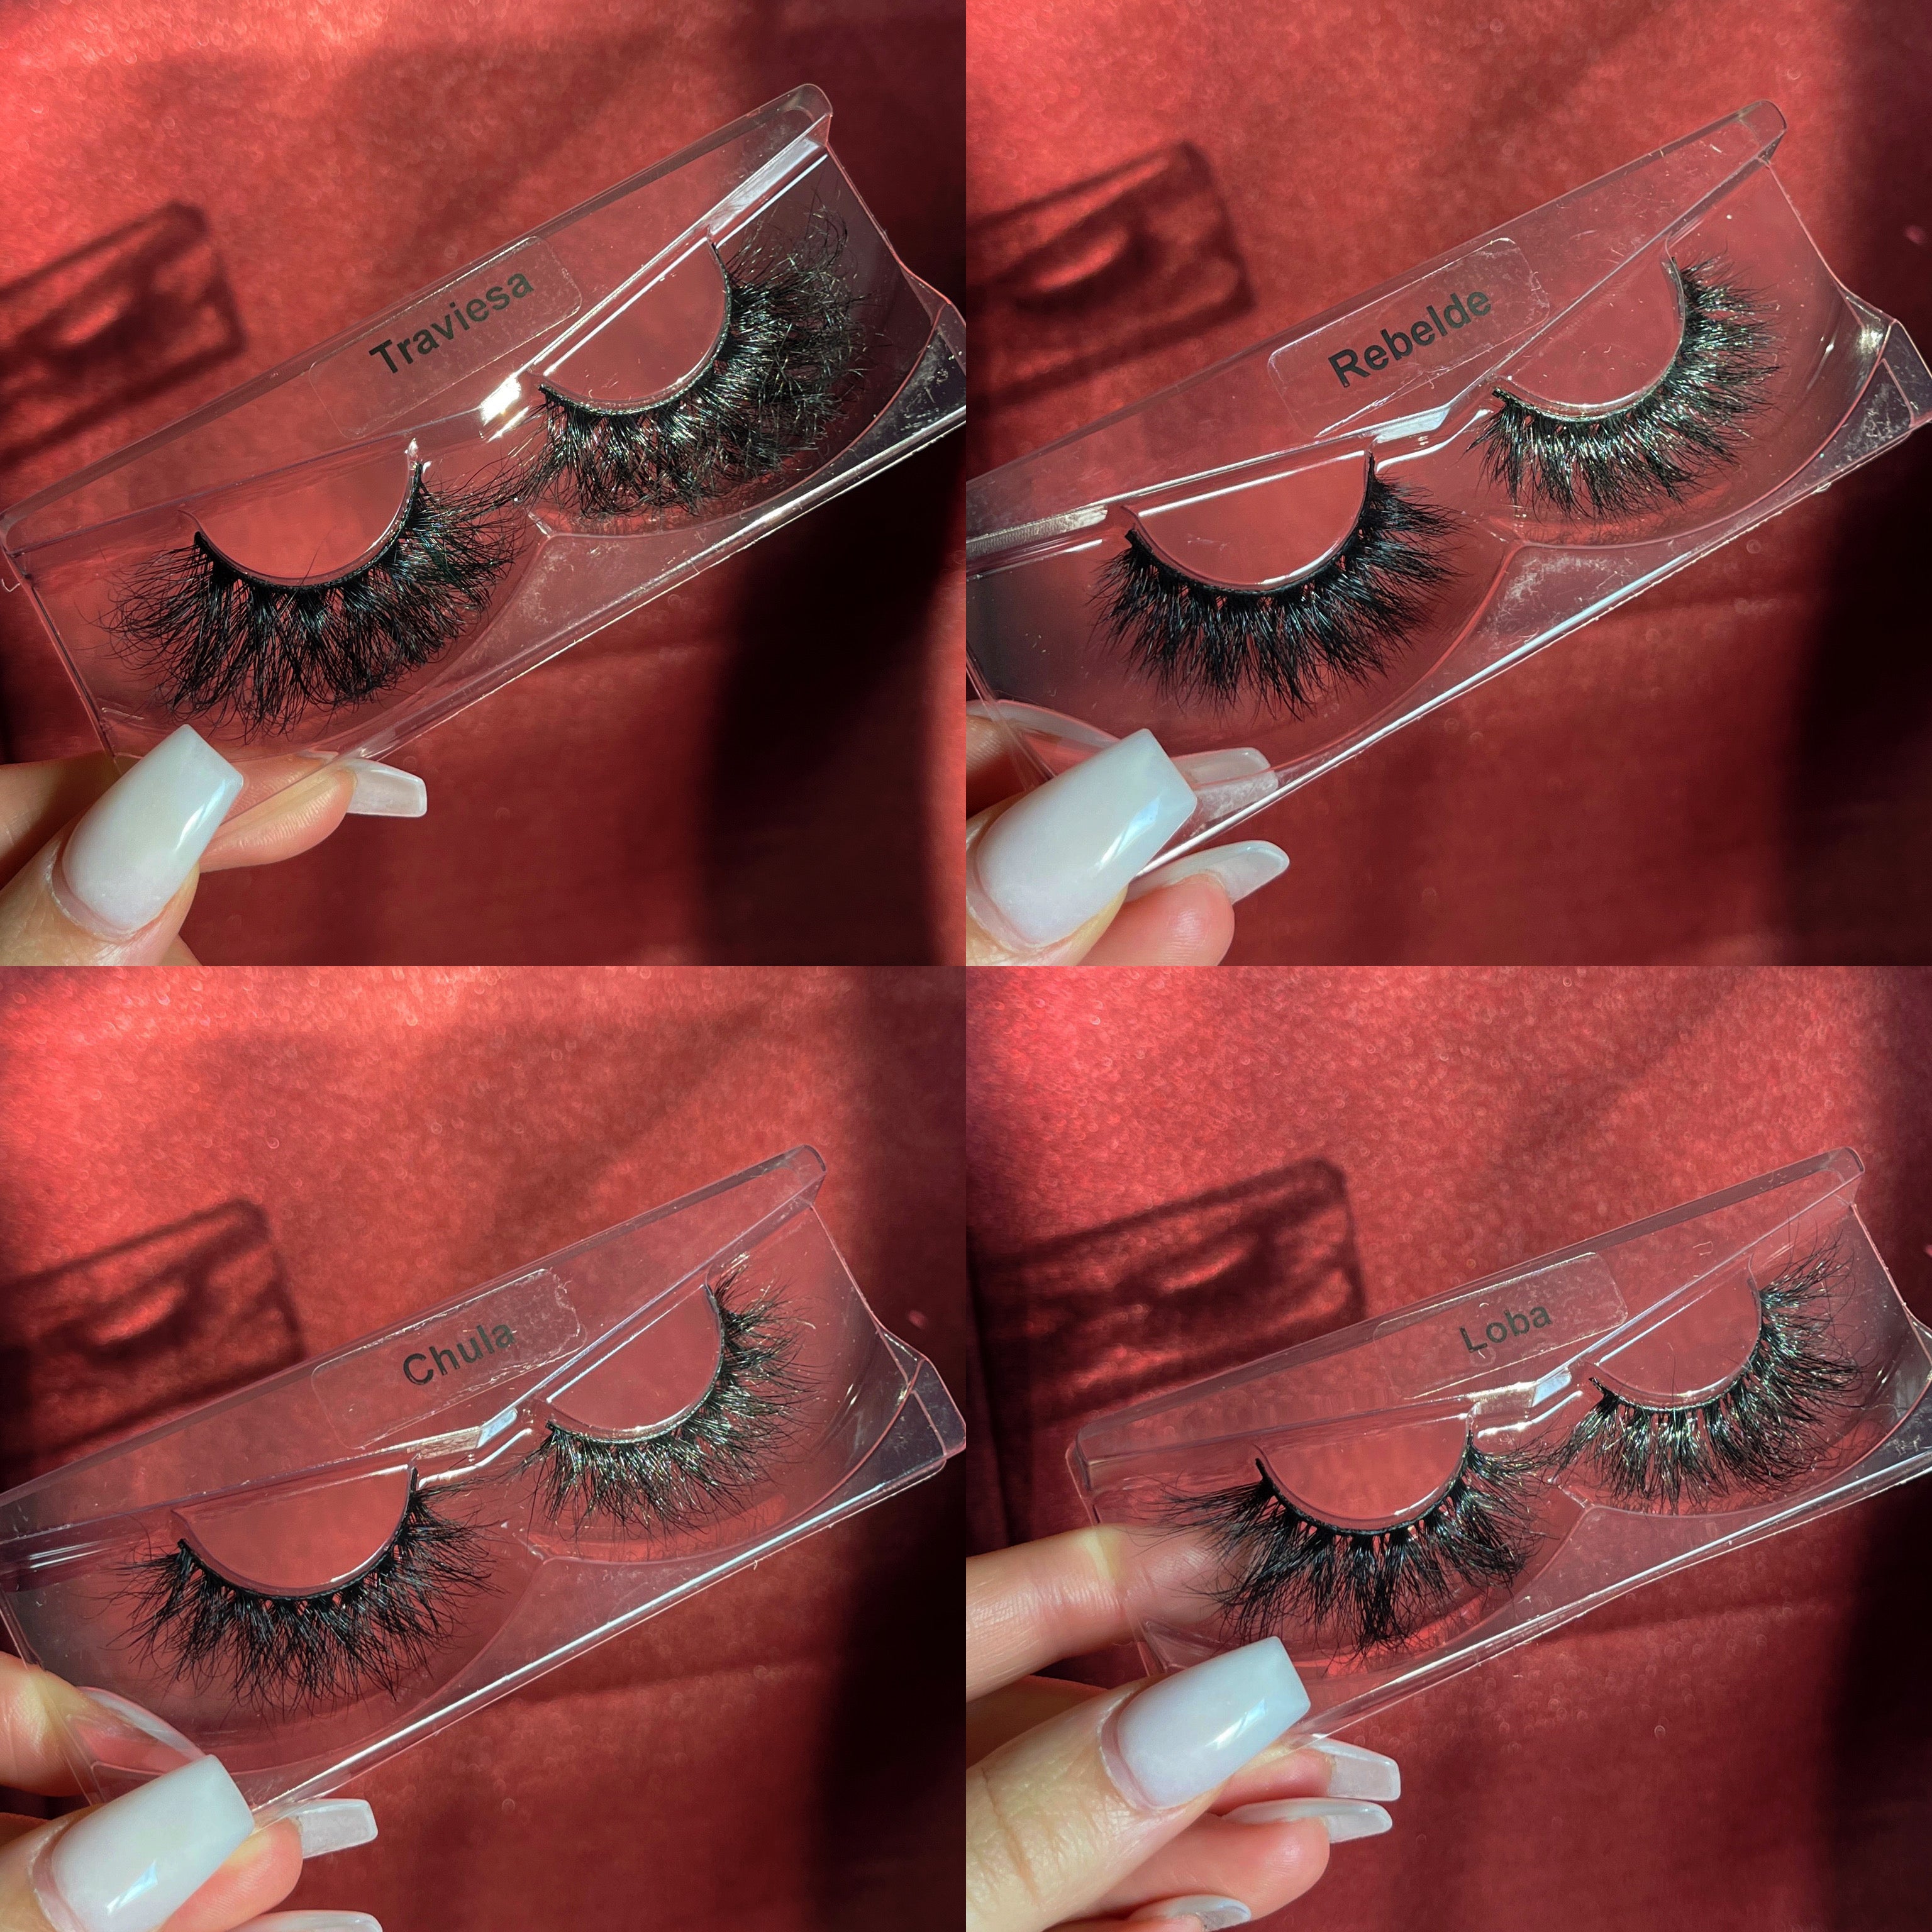 GG Lashes